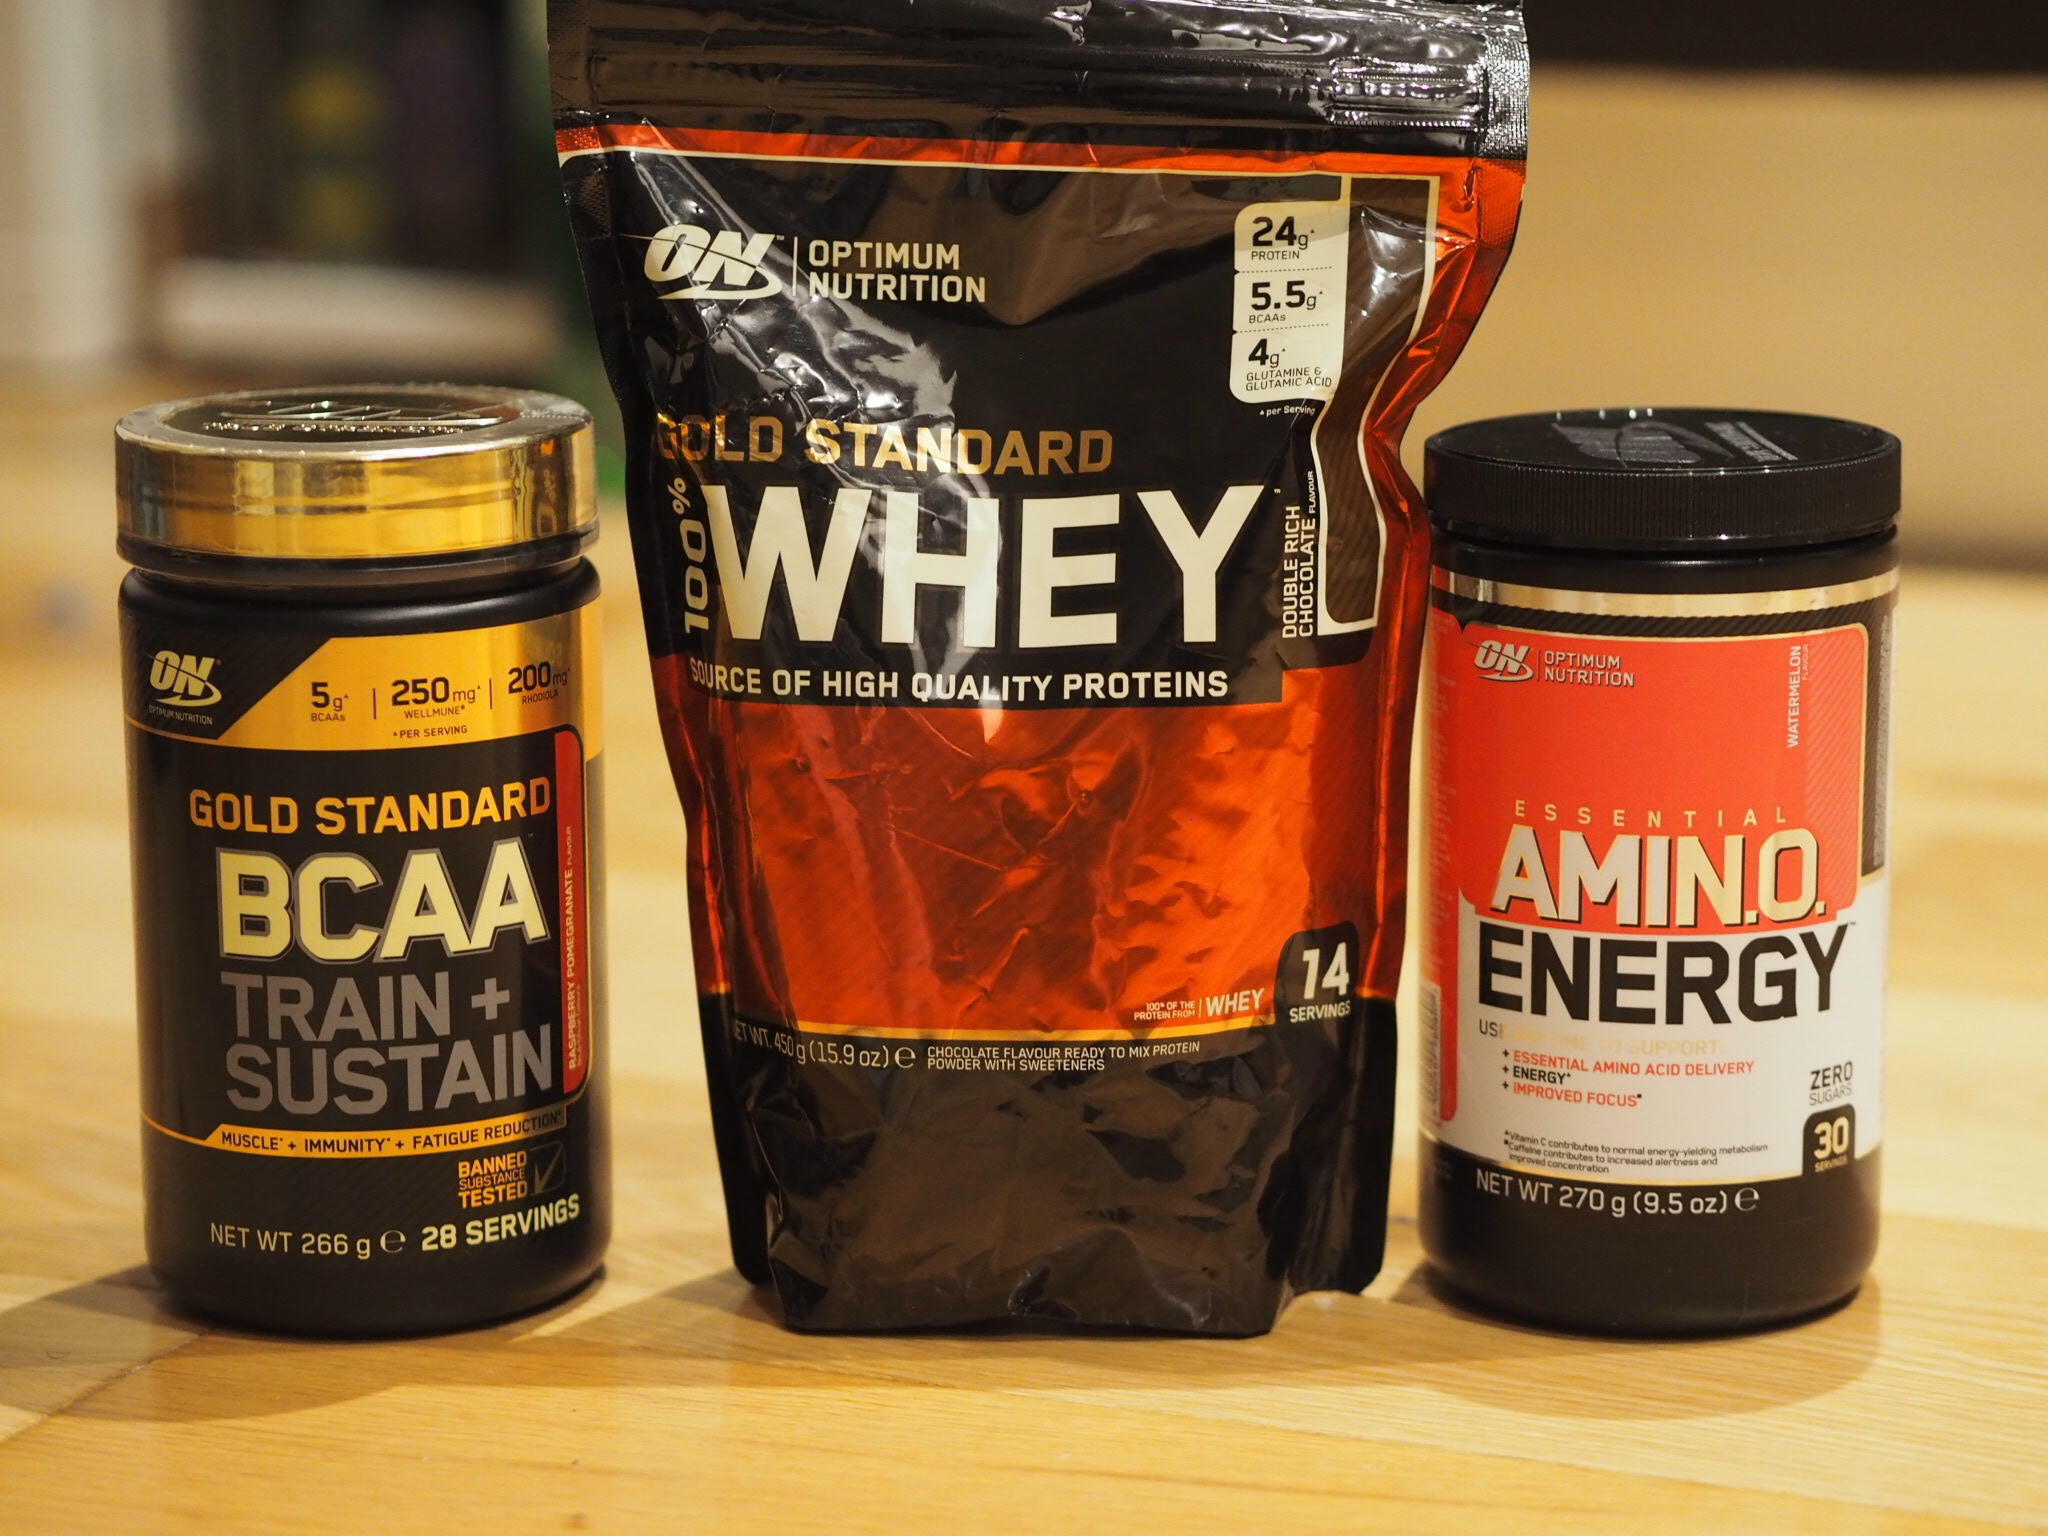 Go for Gold Standard with Optimum Nutrition